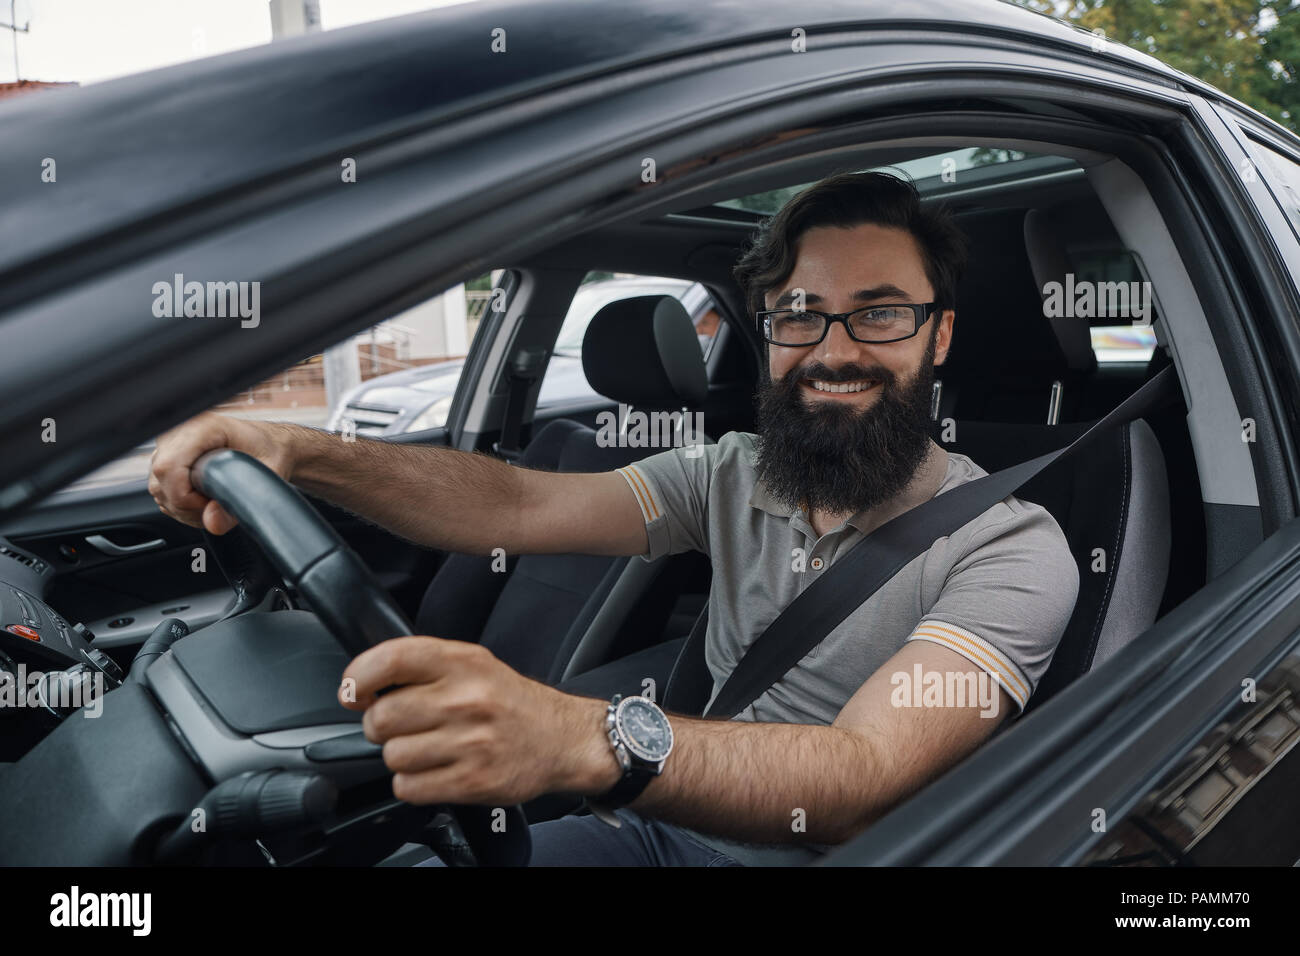 Happy car driver with fastened seat belt Stock Photo - Alamy